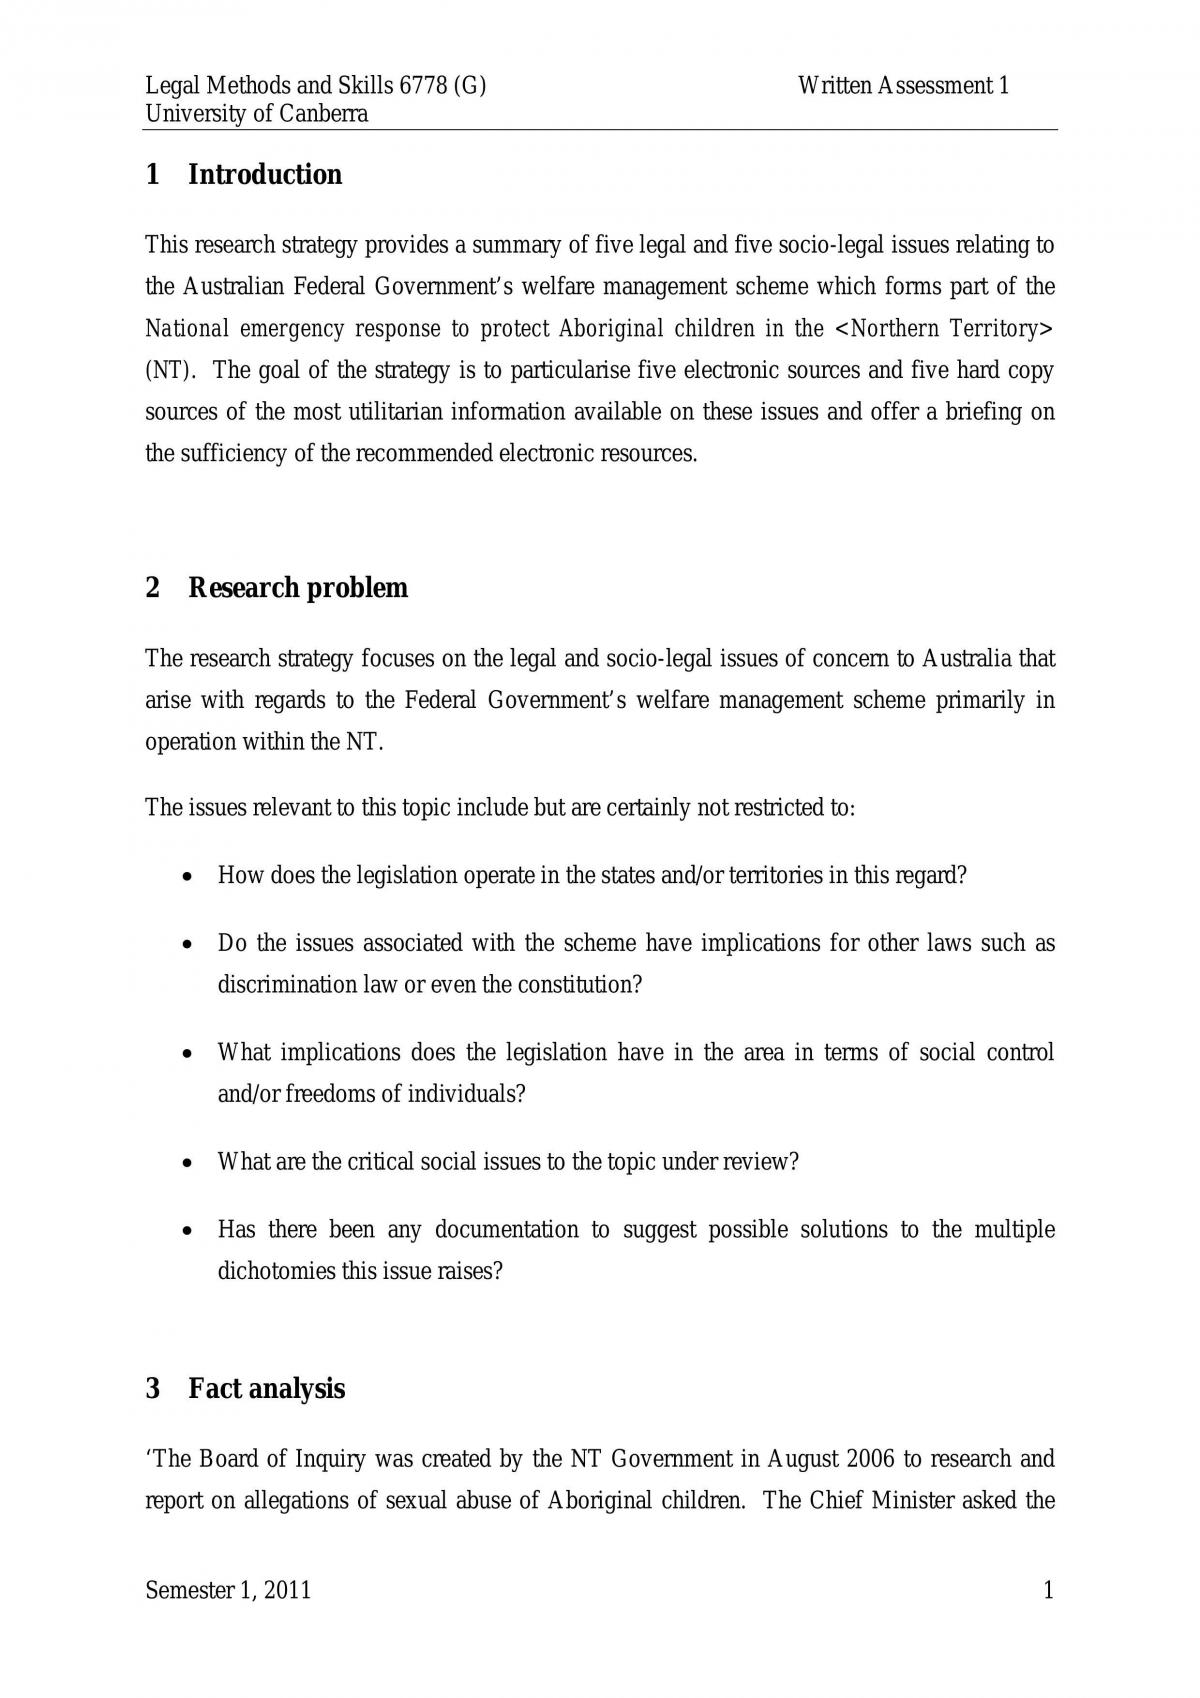 Legal Methods & Skills (legal and socio-legal issues) - Page 1